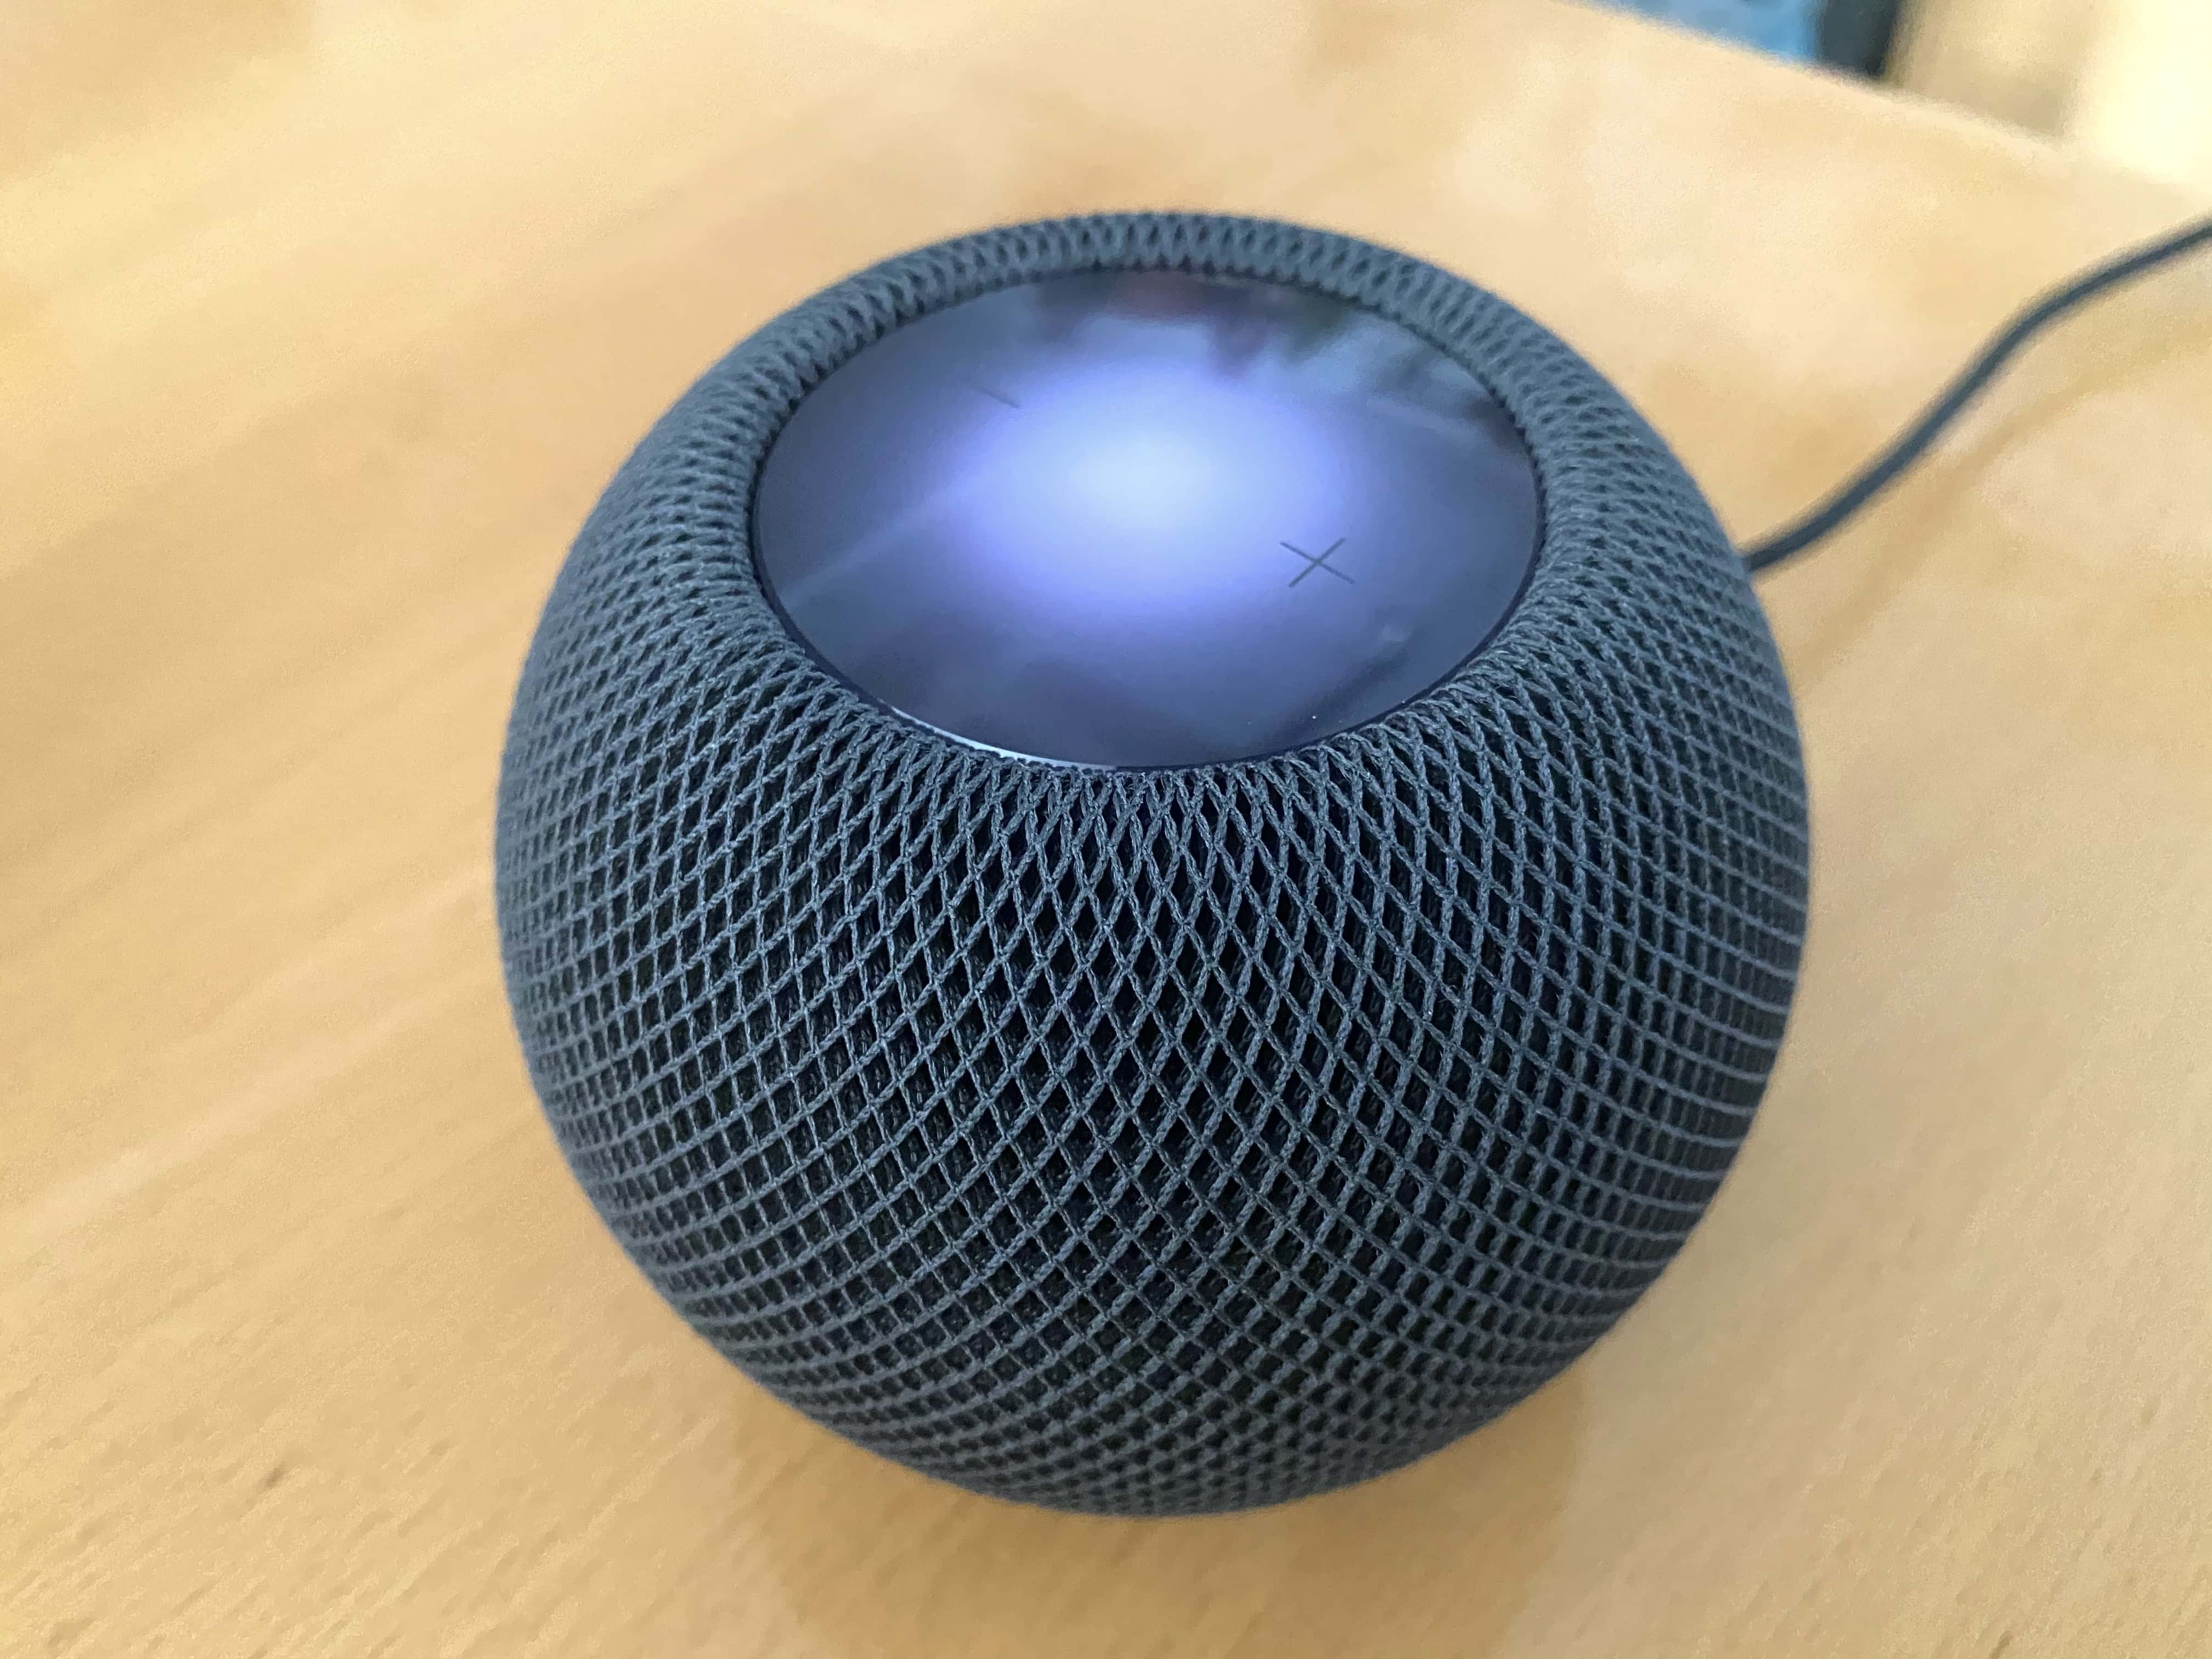 HomePod mini review: Sounds pretty big for a little guy | Cult of Mac